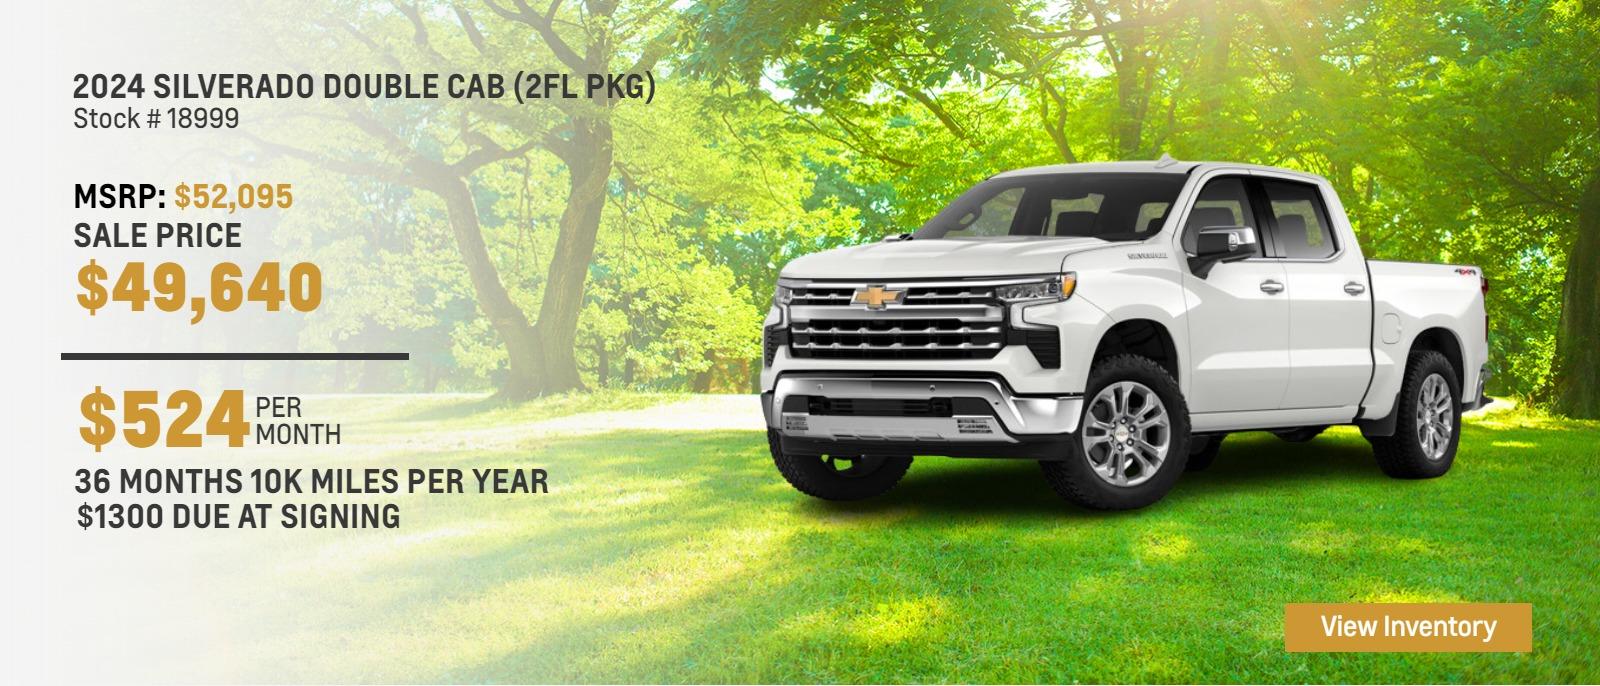 Stock # 18999
2024 Silverado Double Cab (2FL pkg)
MSRP $52095
Sale Price $49640
$524/per month
36 Months 10k miles per year
$1300 due at signing